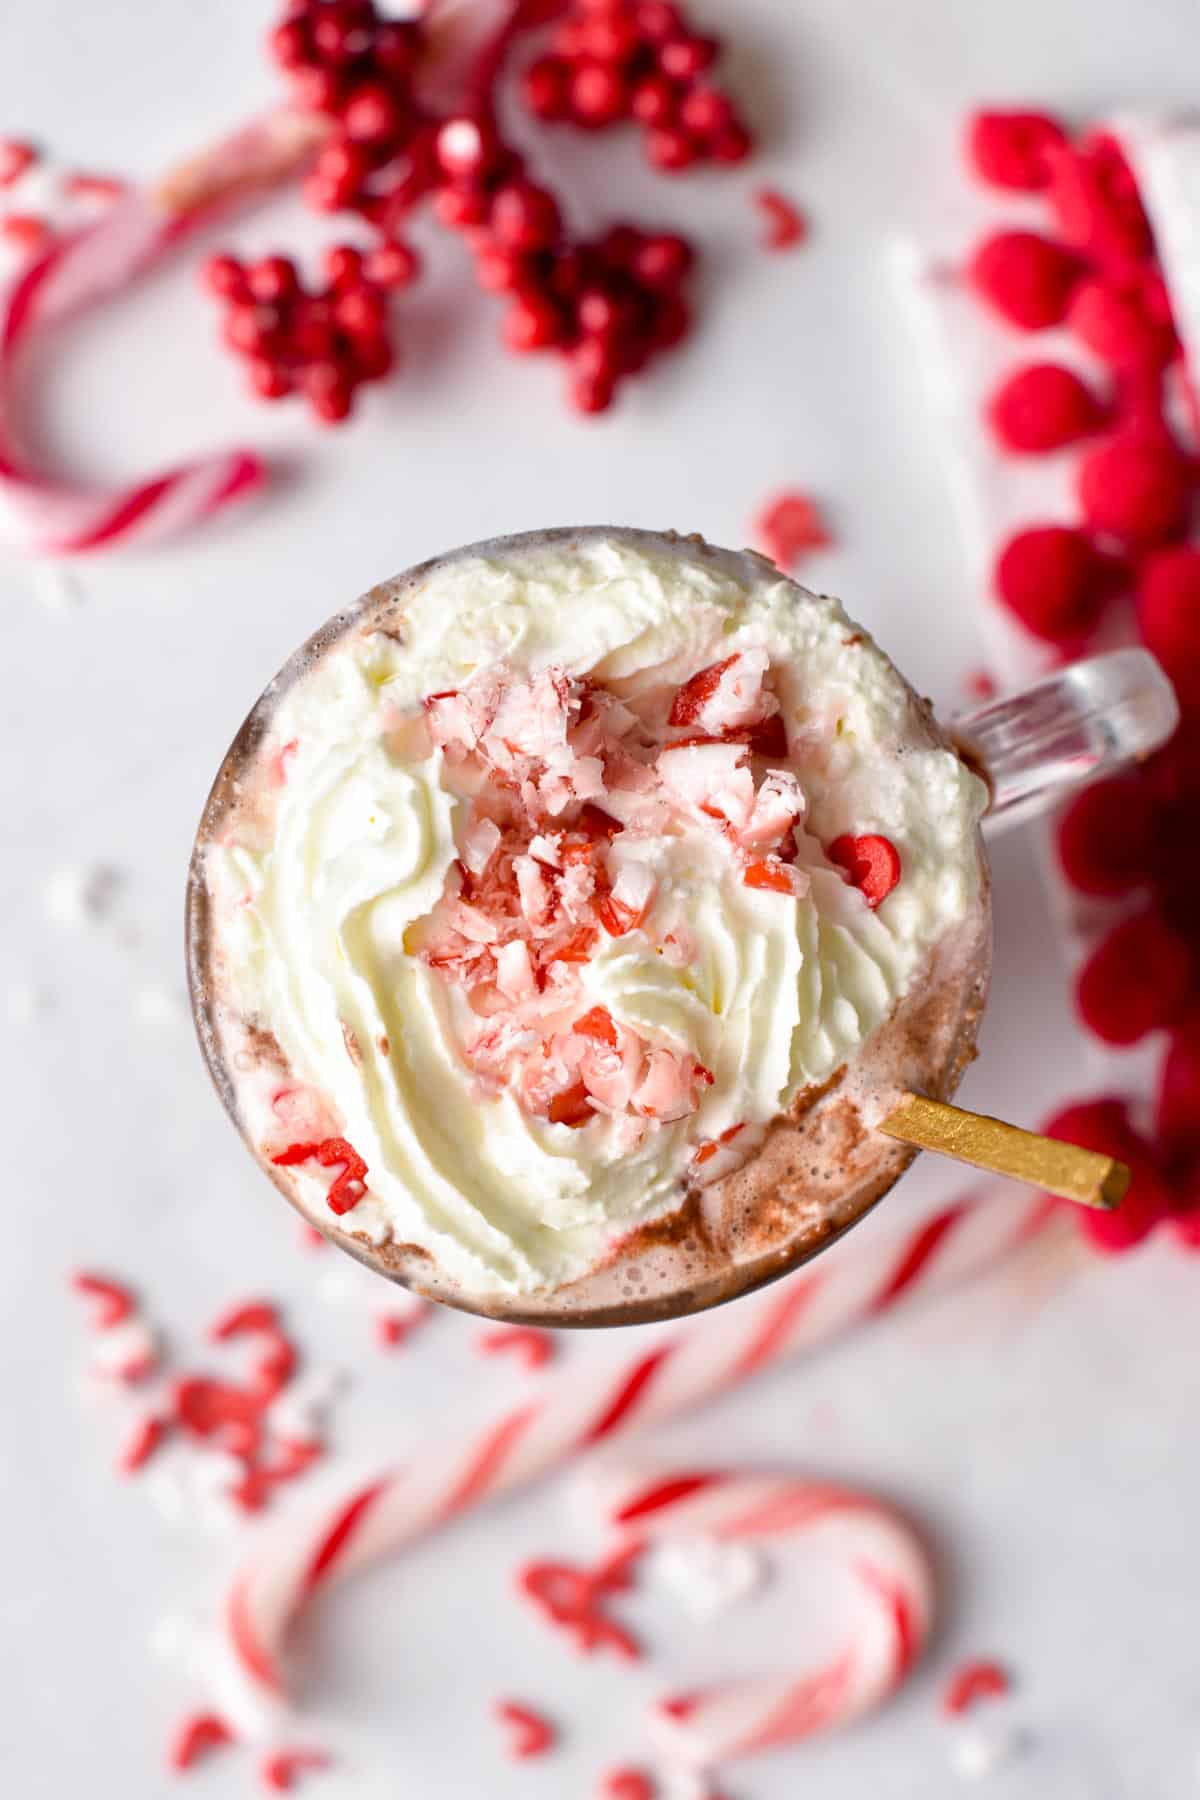 Peppermint Hot Chocolate viewed from the top and decorated with whipped coconut cream and pieces of candy cane.